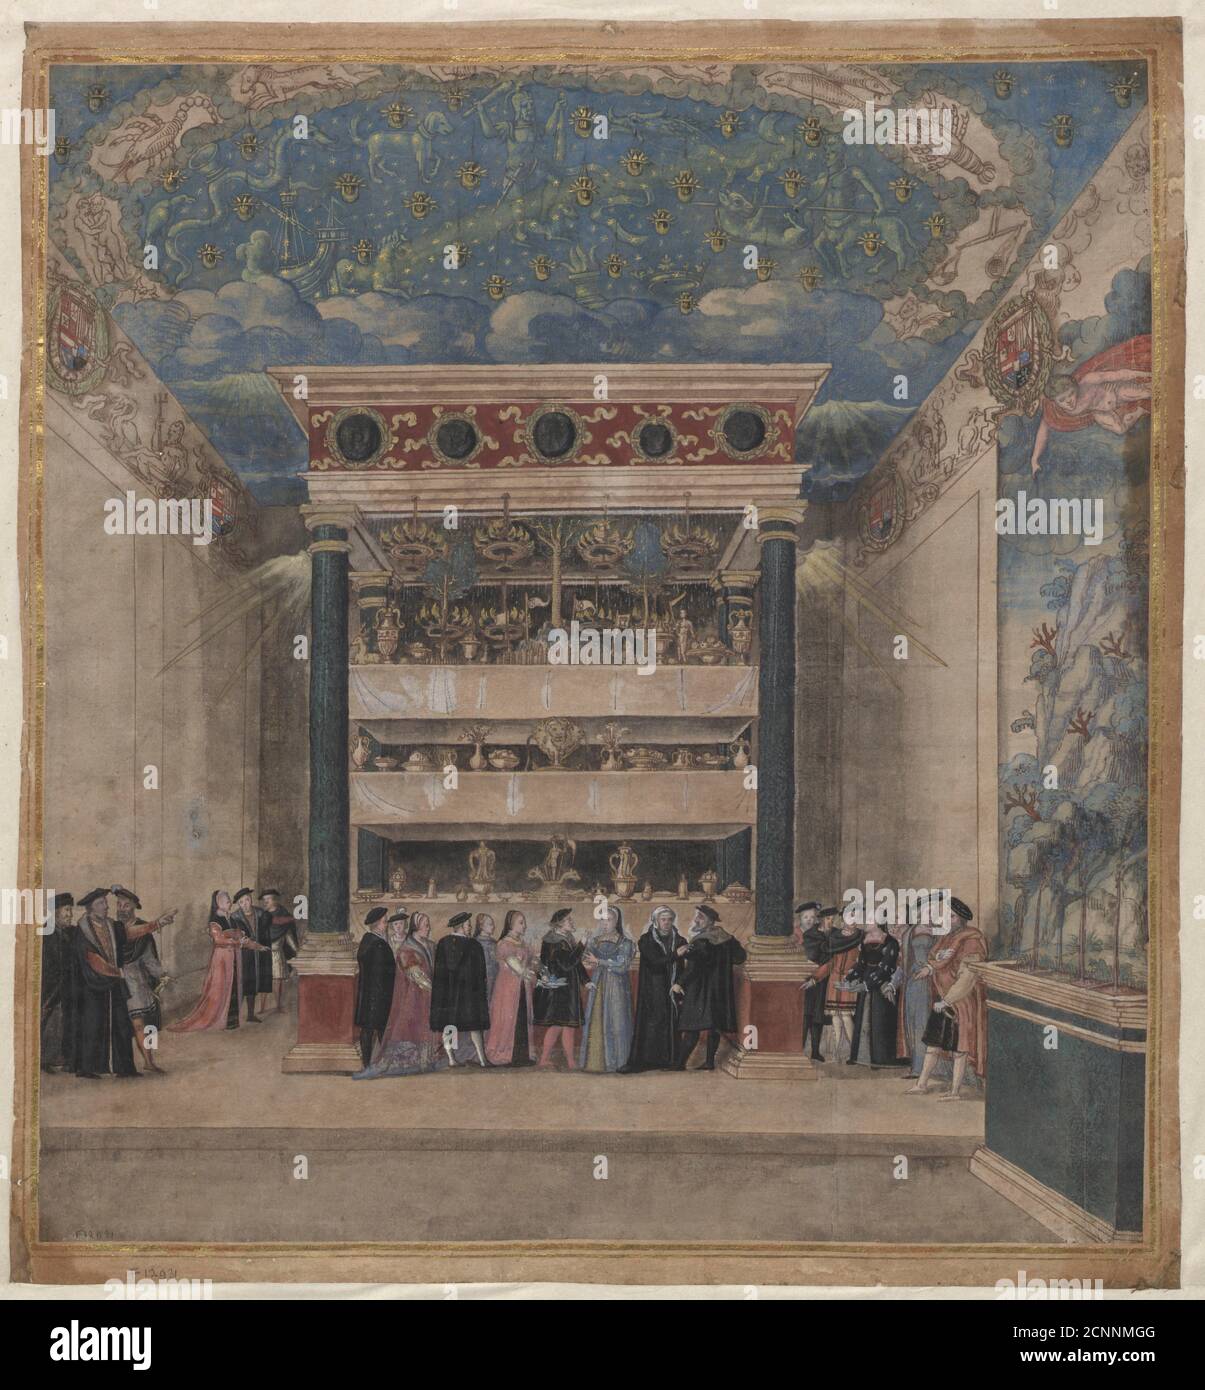 Binche Palace during the celebrations in August 1549, 1549. Found in the collection of Biblioth&#xe8;que royale de Belgique. Stock Photo